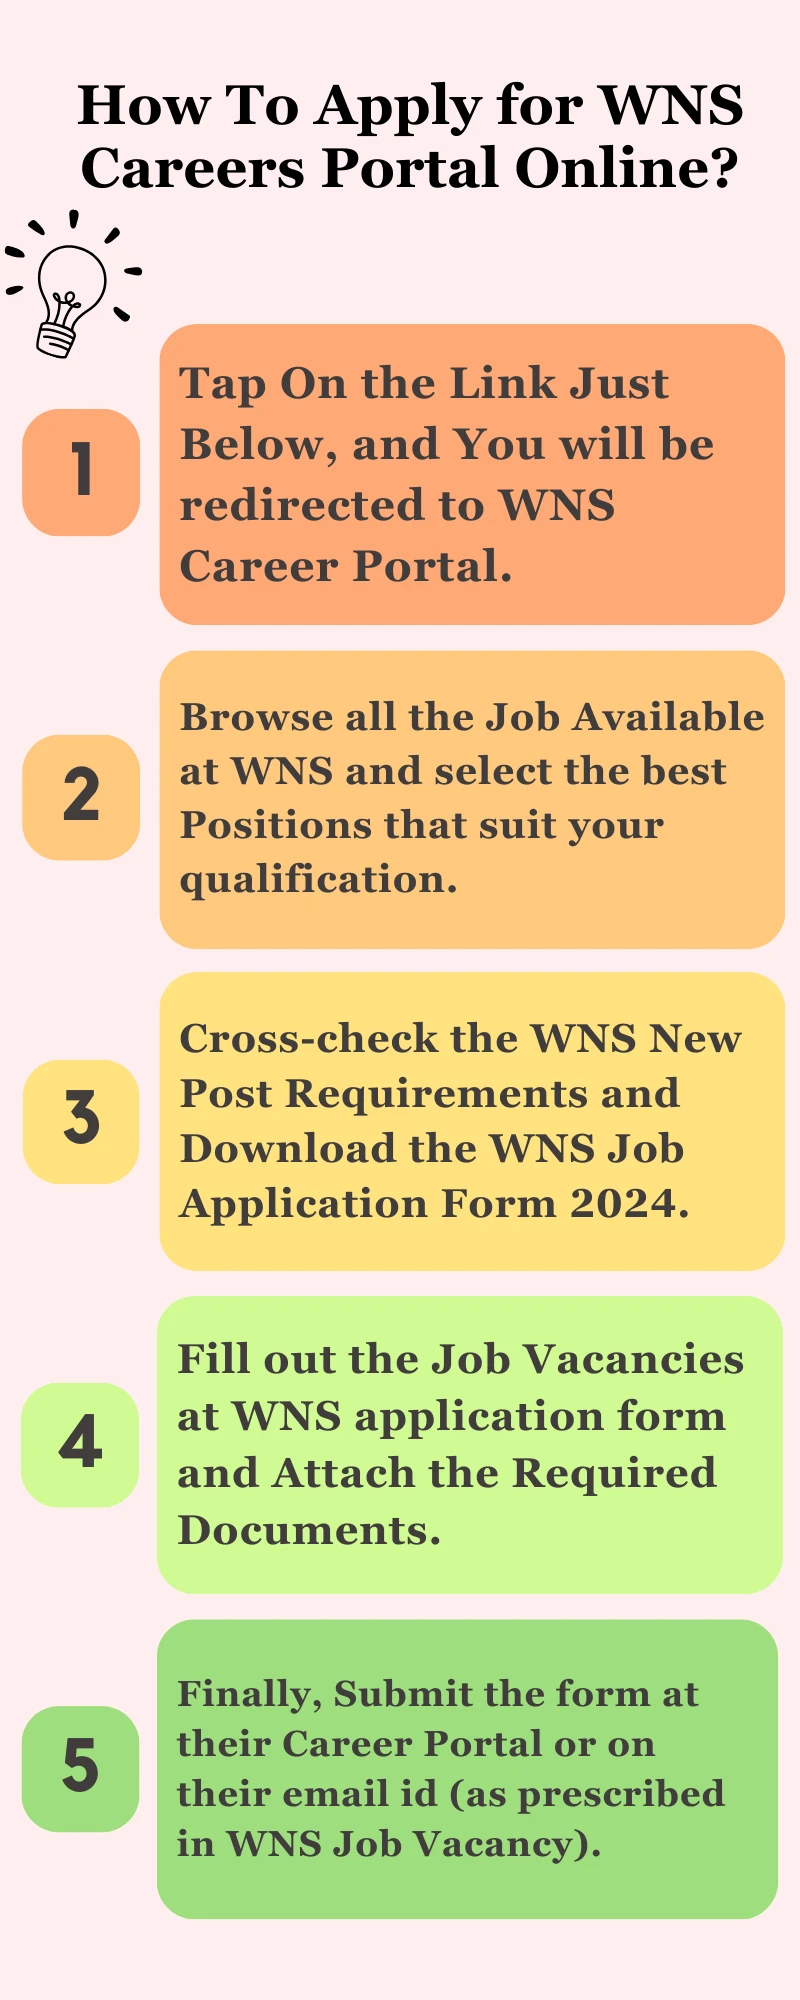 How To Apply for WNS Careers Portal Online?